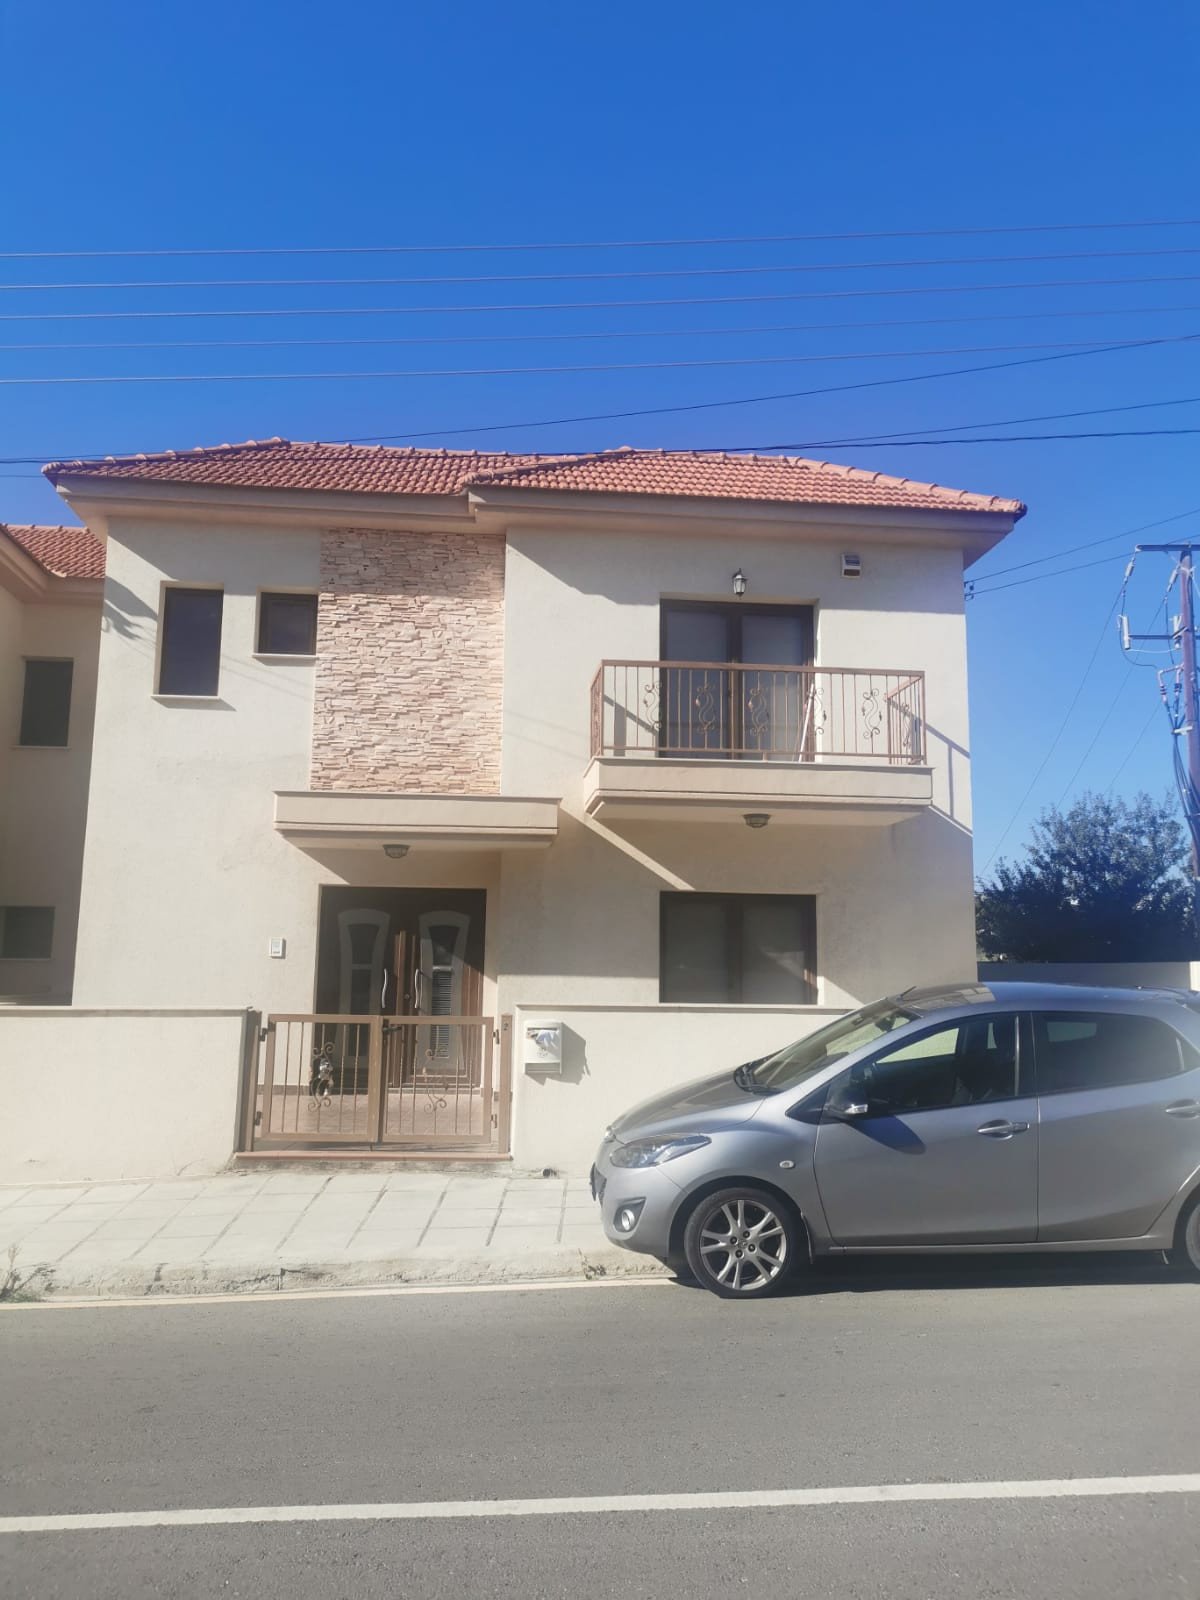 Property for Rent: House (Detached) in Agios Sylas, Limassol for Rent | Key Realtor Cyprus